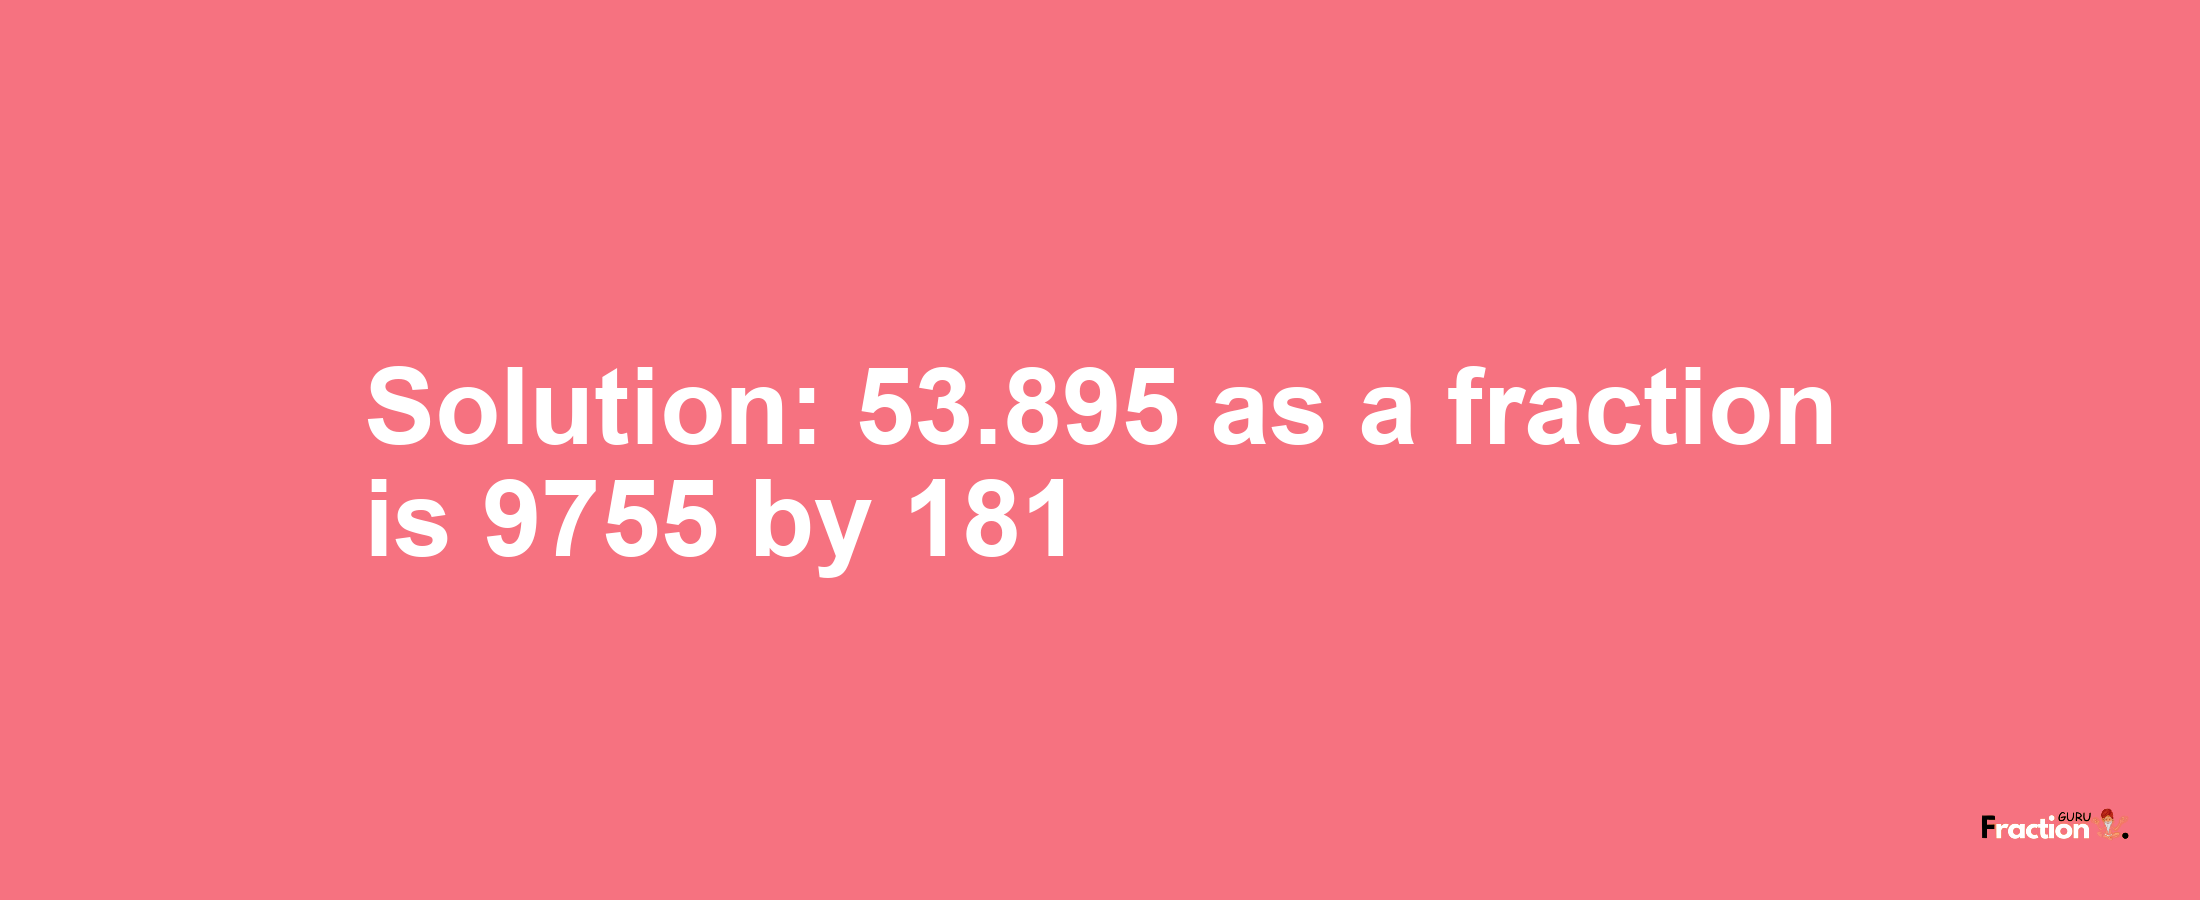 Solution:53.895 as a fraction is 9755/181